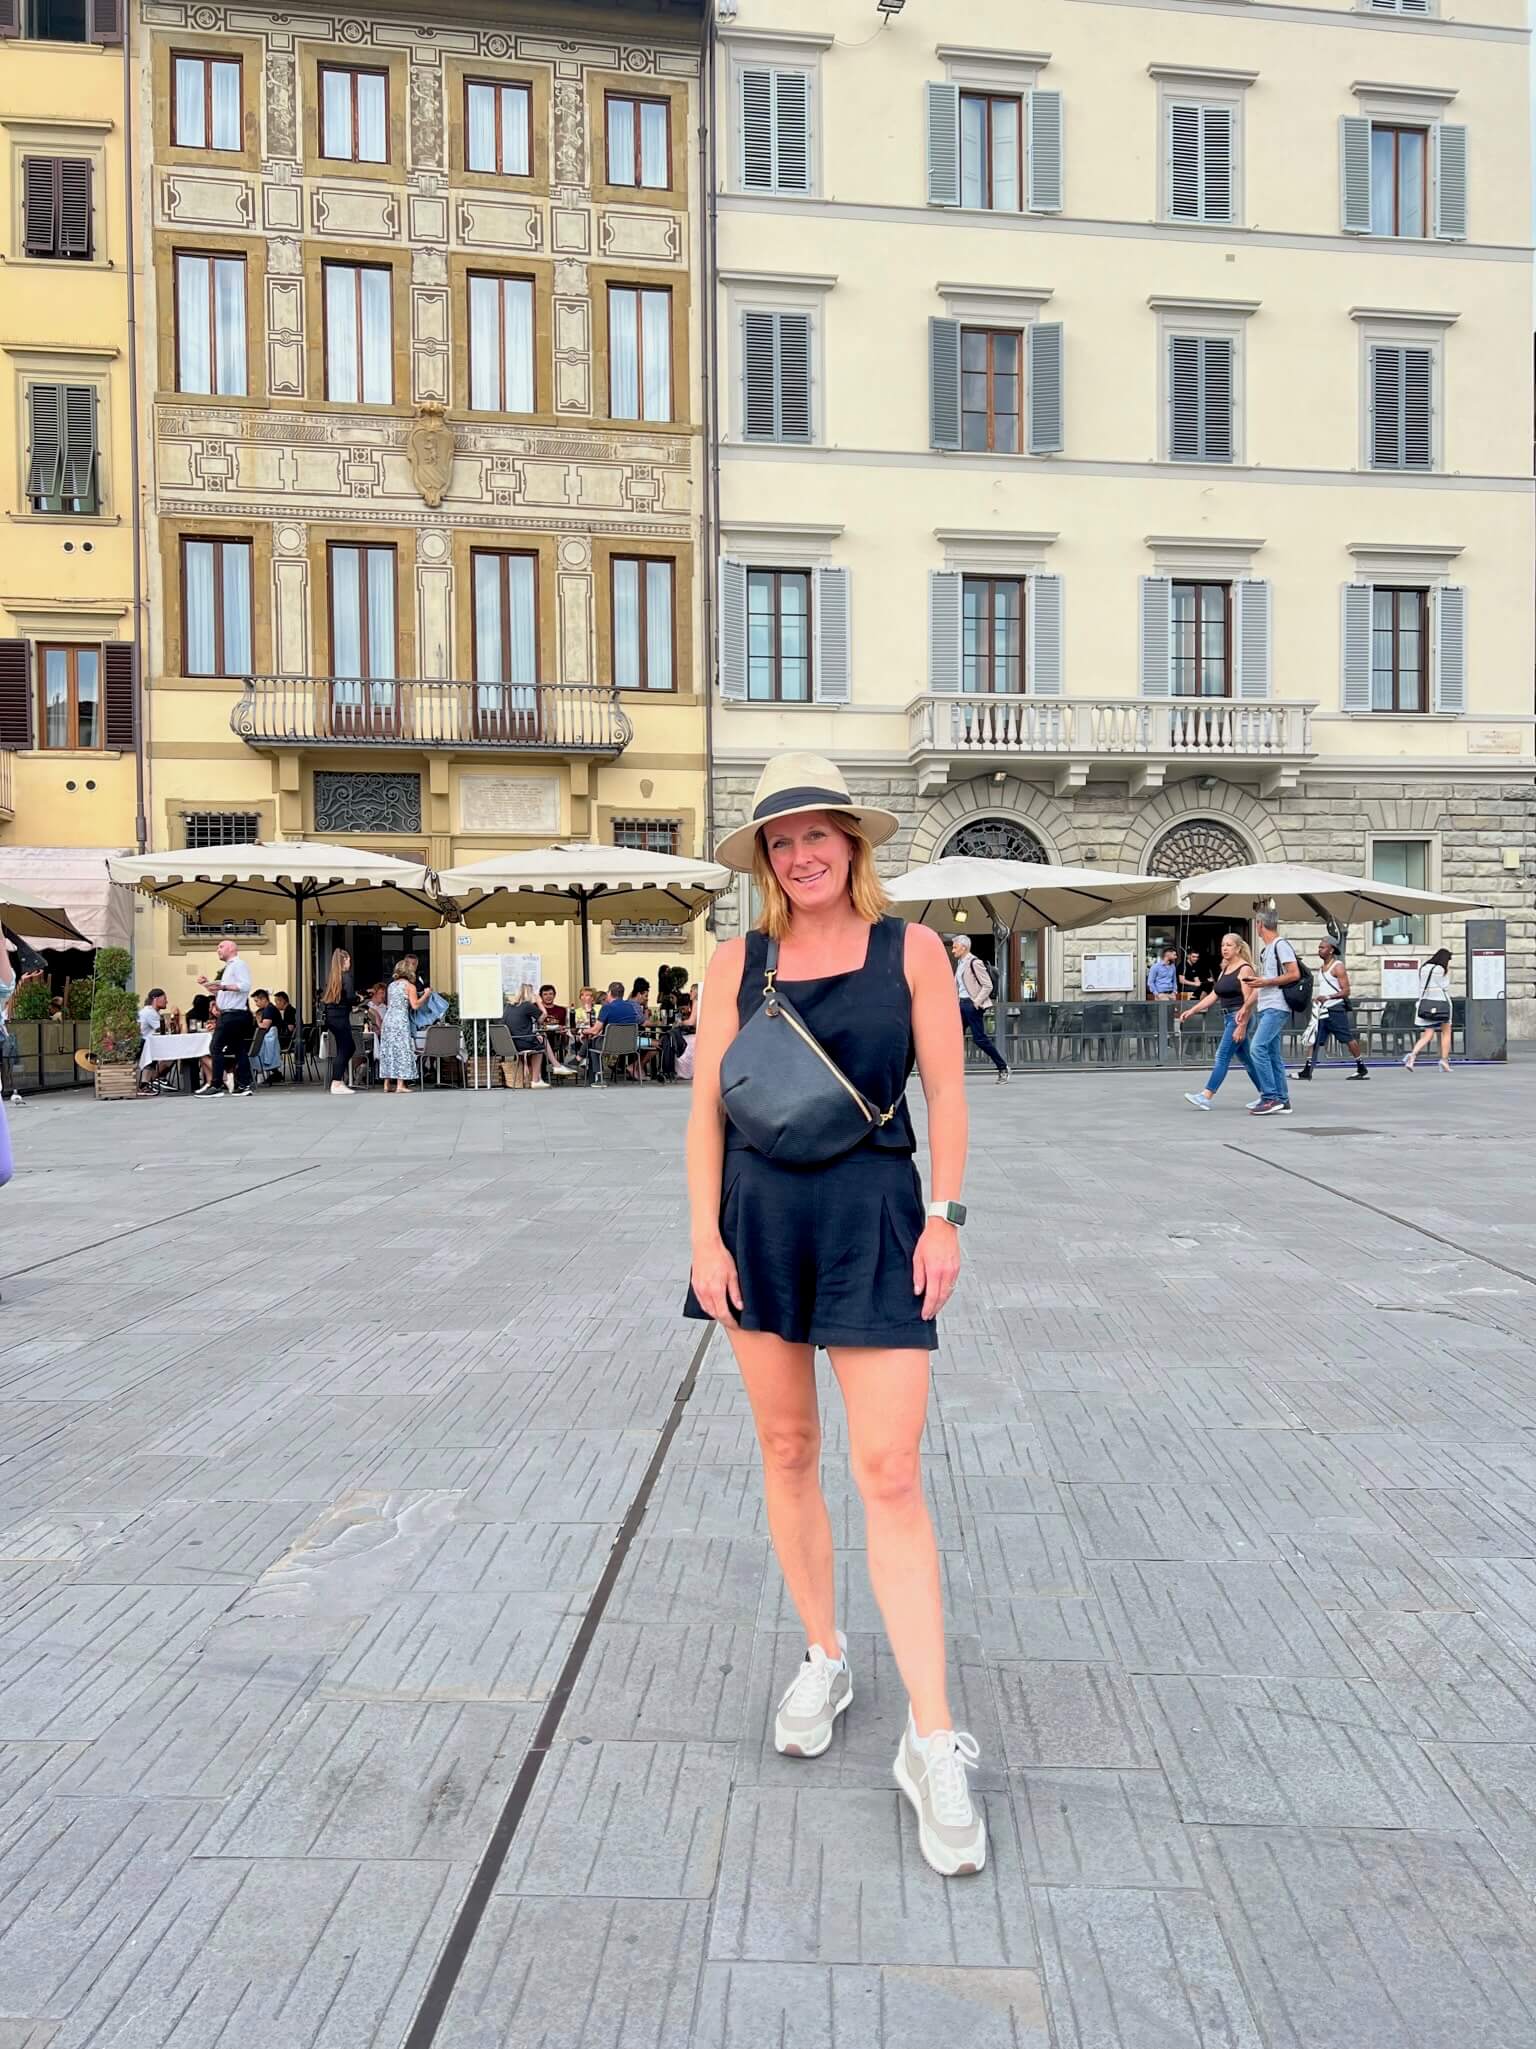 How To Pack For A European Vacation Casual Tank & Shorts Matching Set what to wear for a busy day traveling how to look cute while sightseeing must have items for traveling in Europe what to pack for a long vacation how to look cute and comfortable while sightseeing